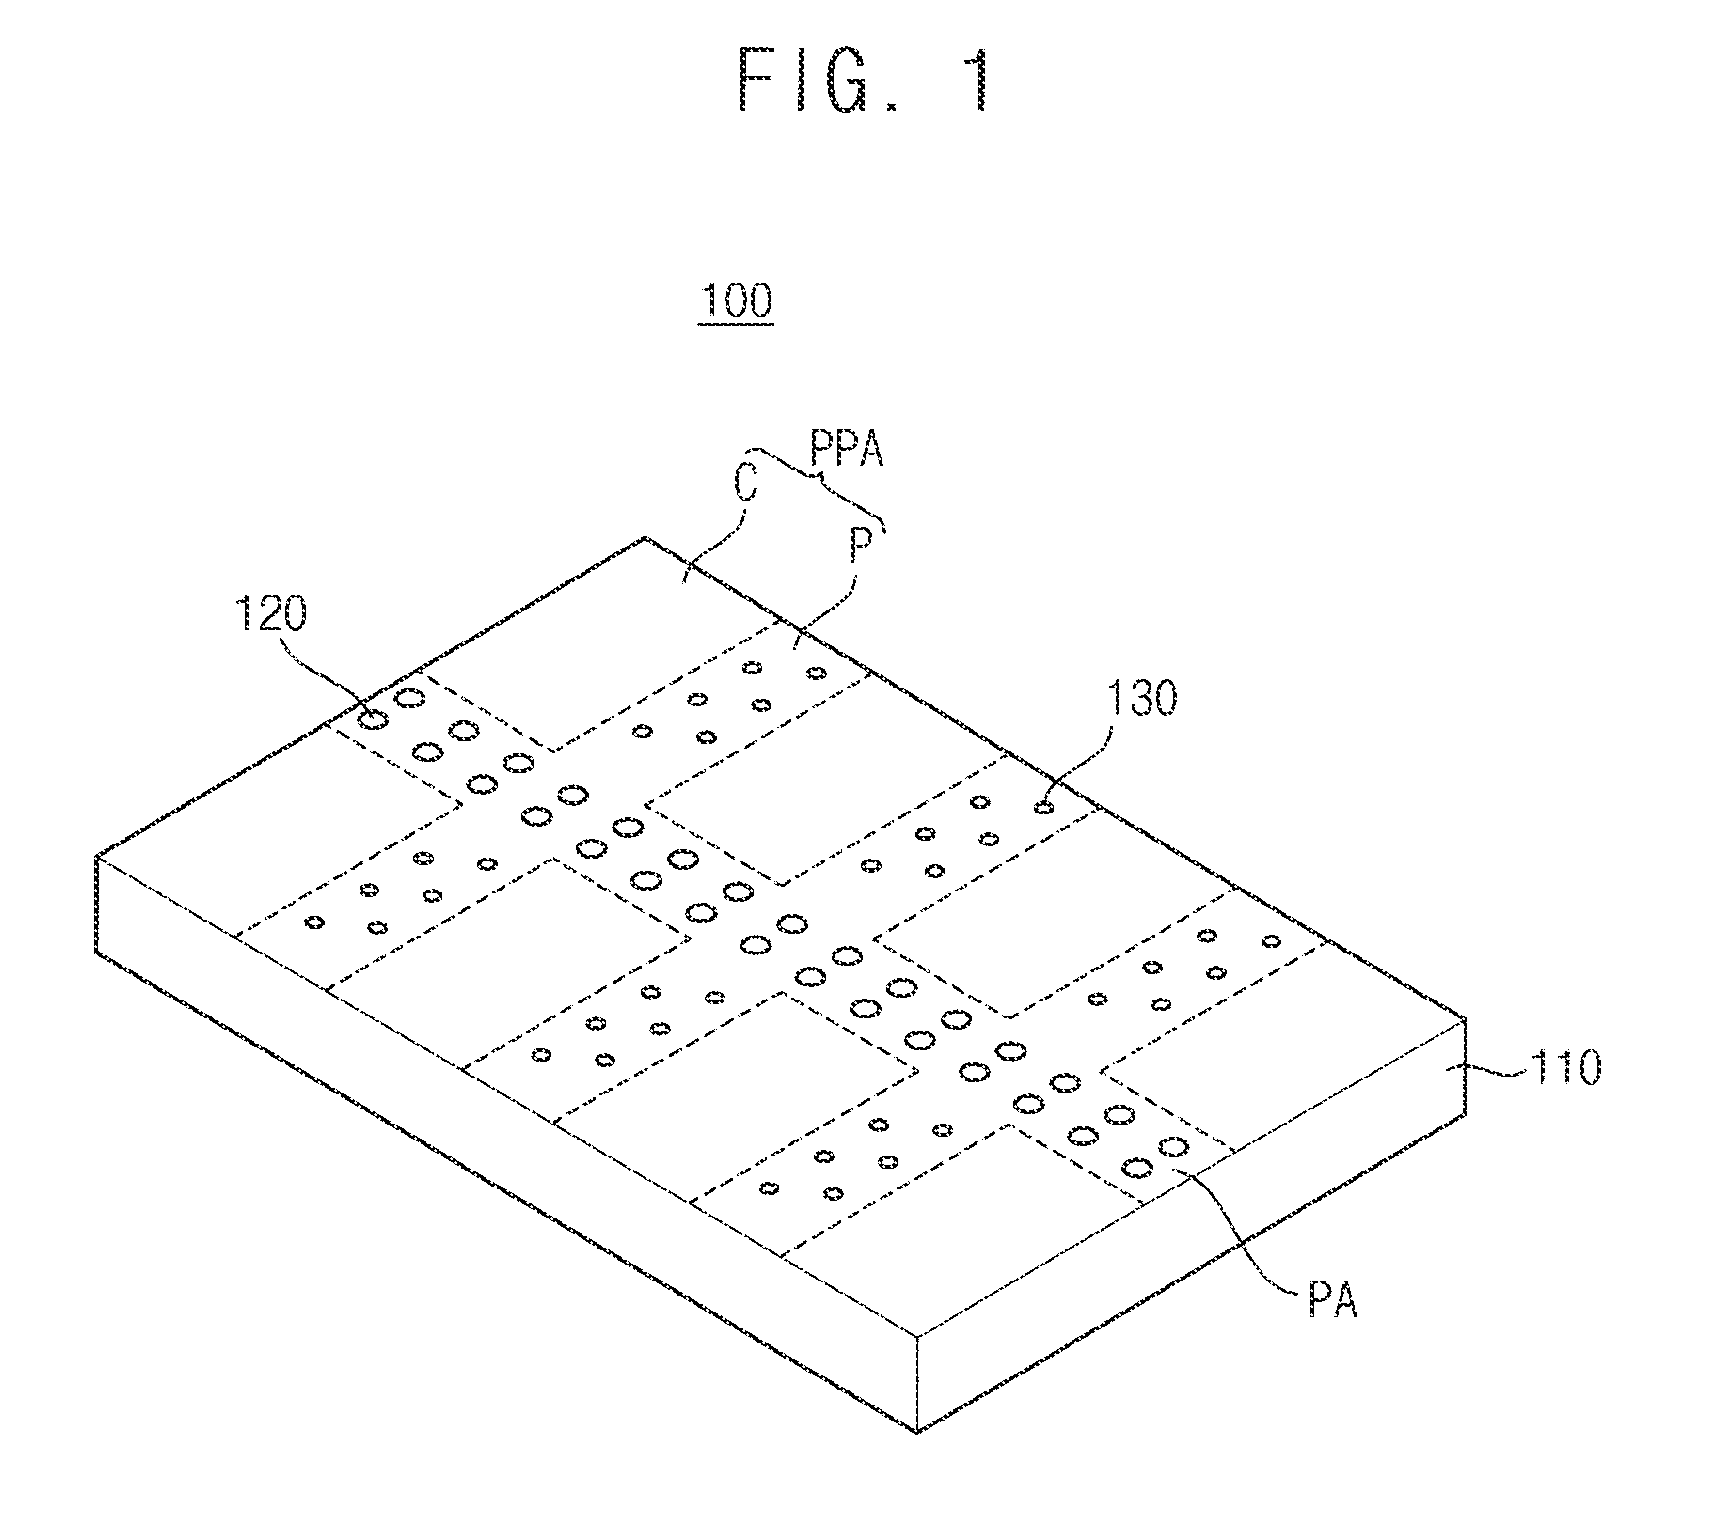 Integrated circuit chip and flip chip package having the integrated circuit chip